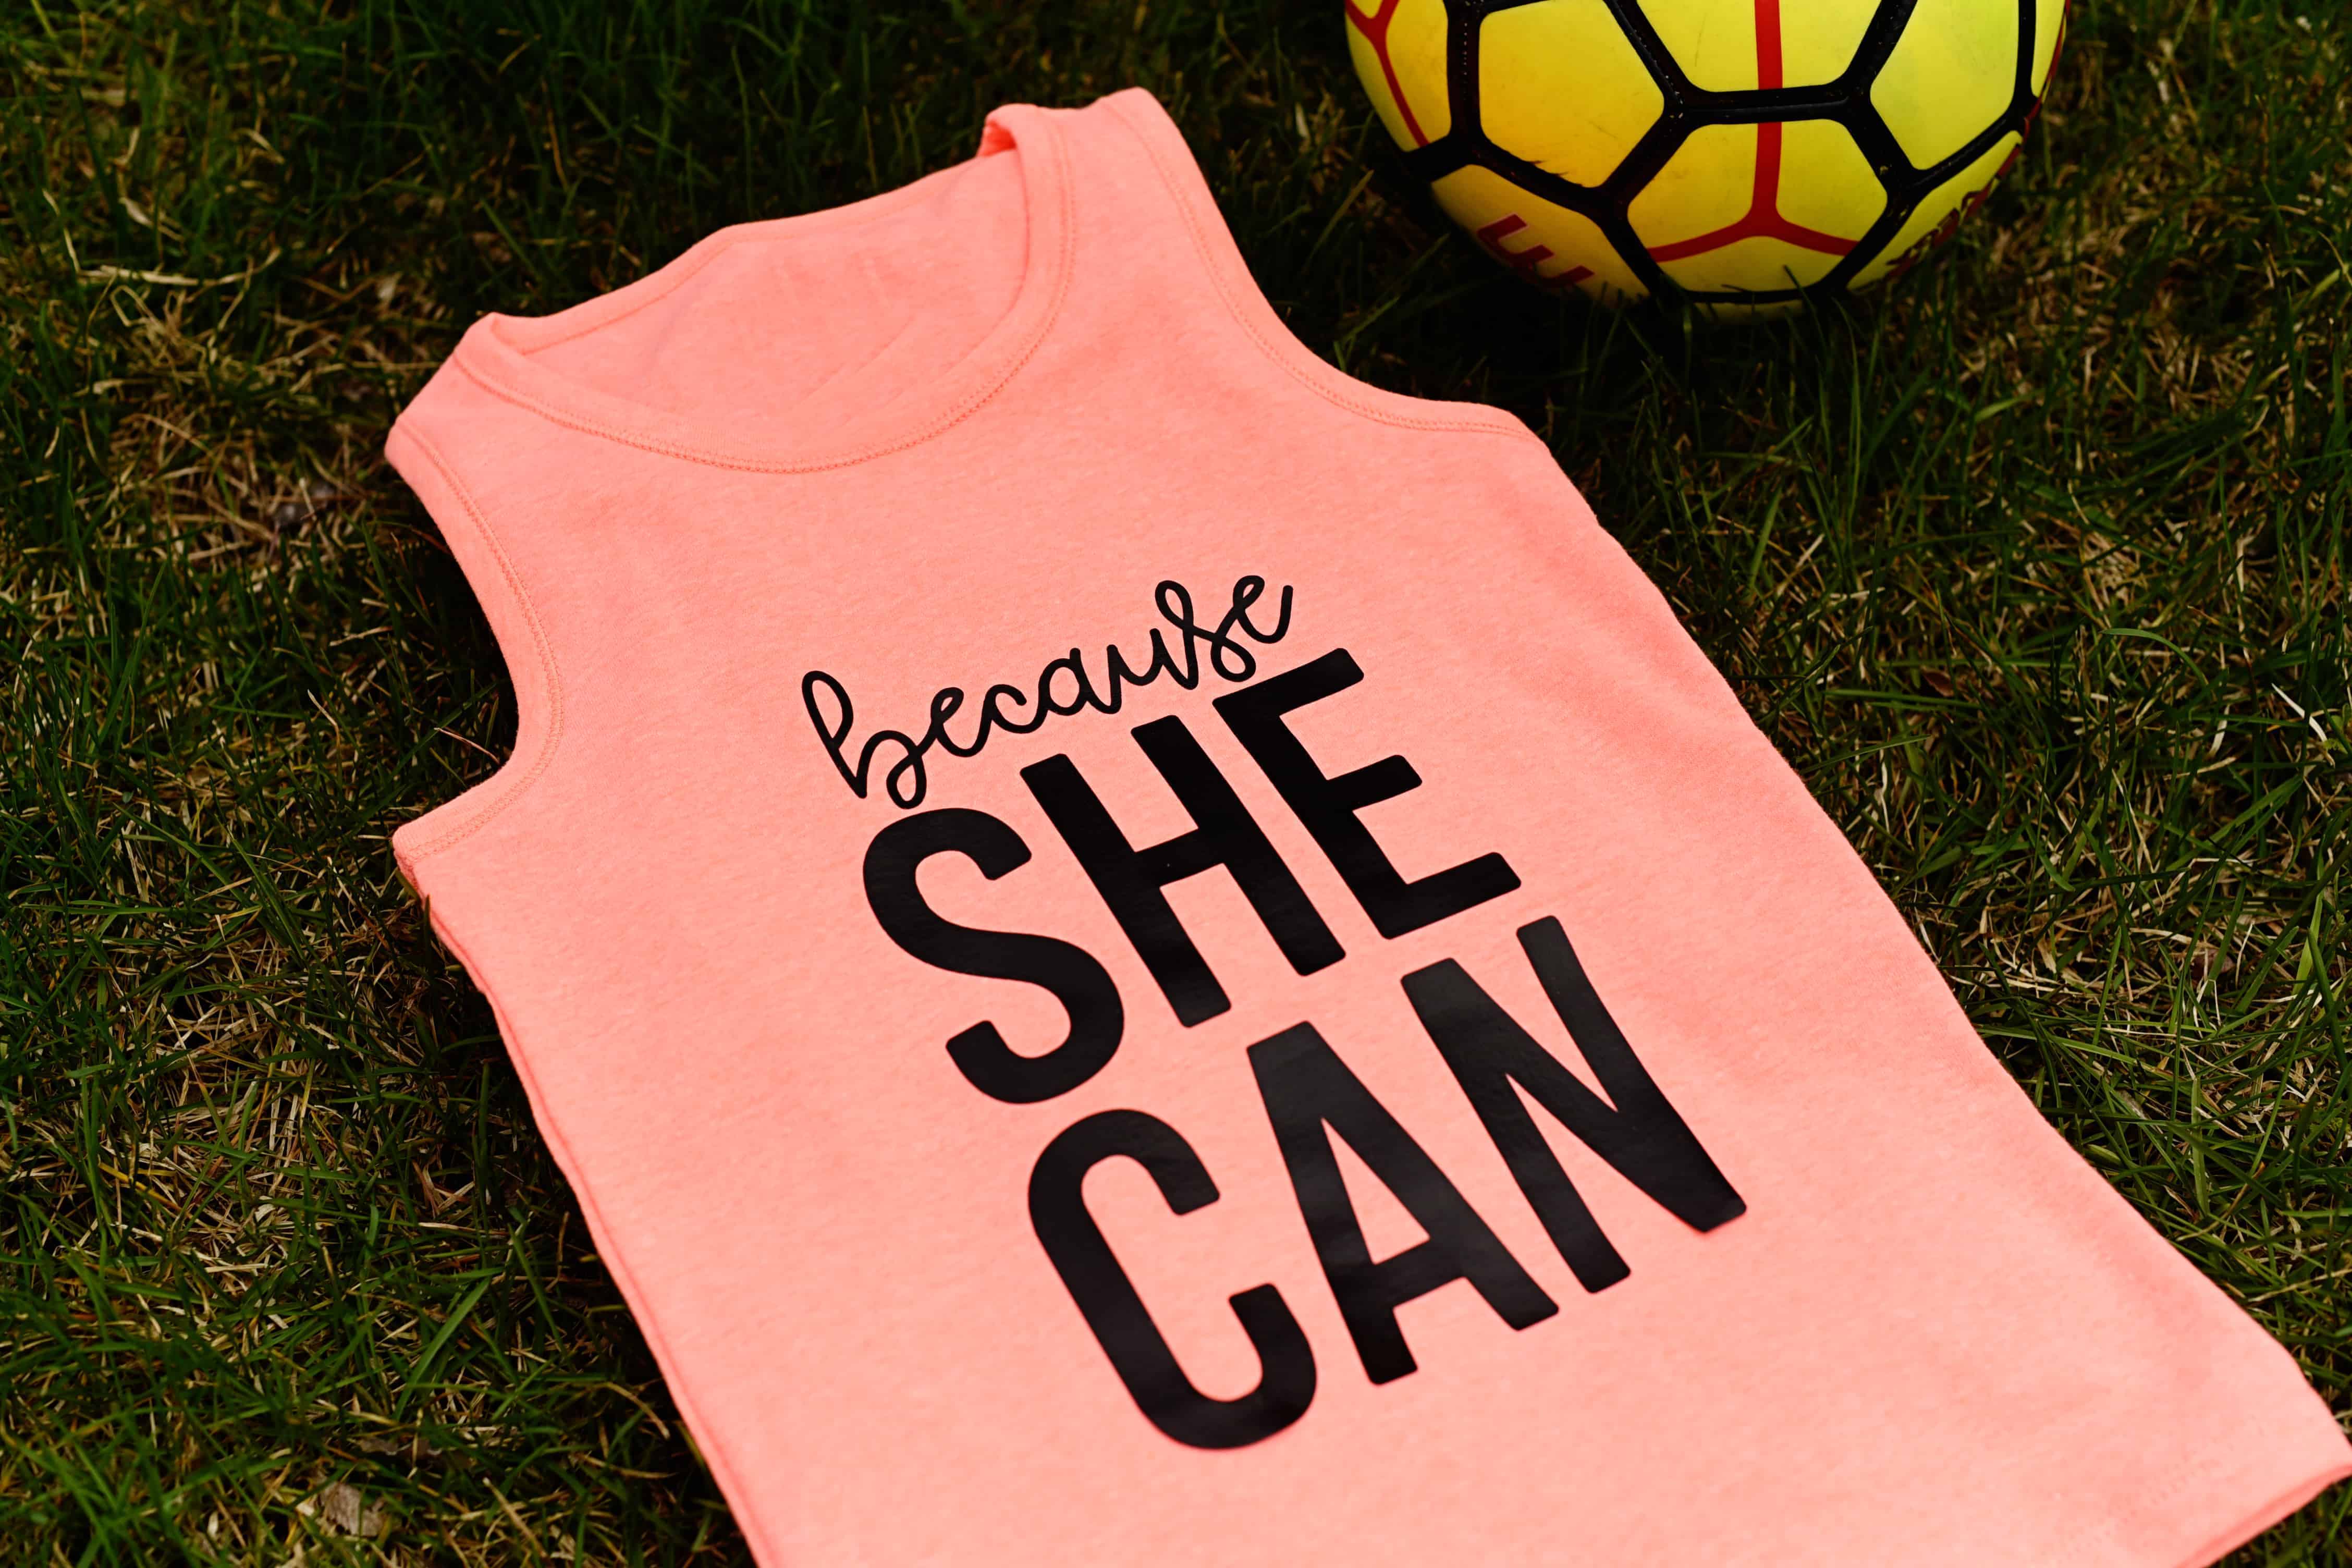 Make this "Because She Can" Girl Power Tank Top with vinyl and this free graphic!